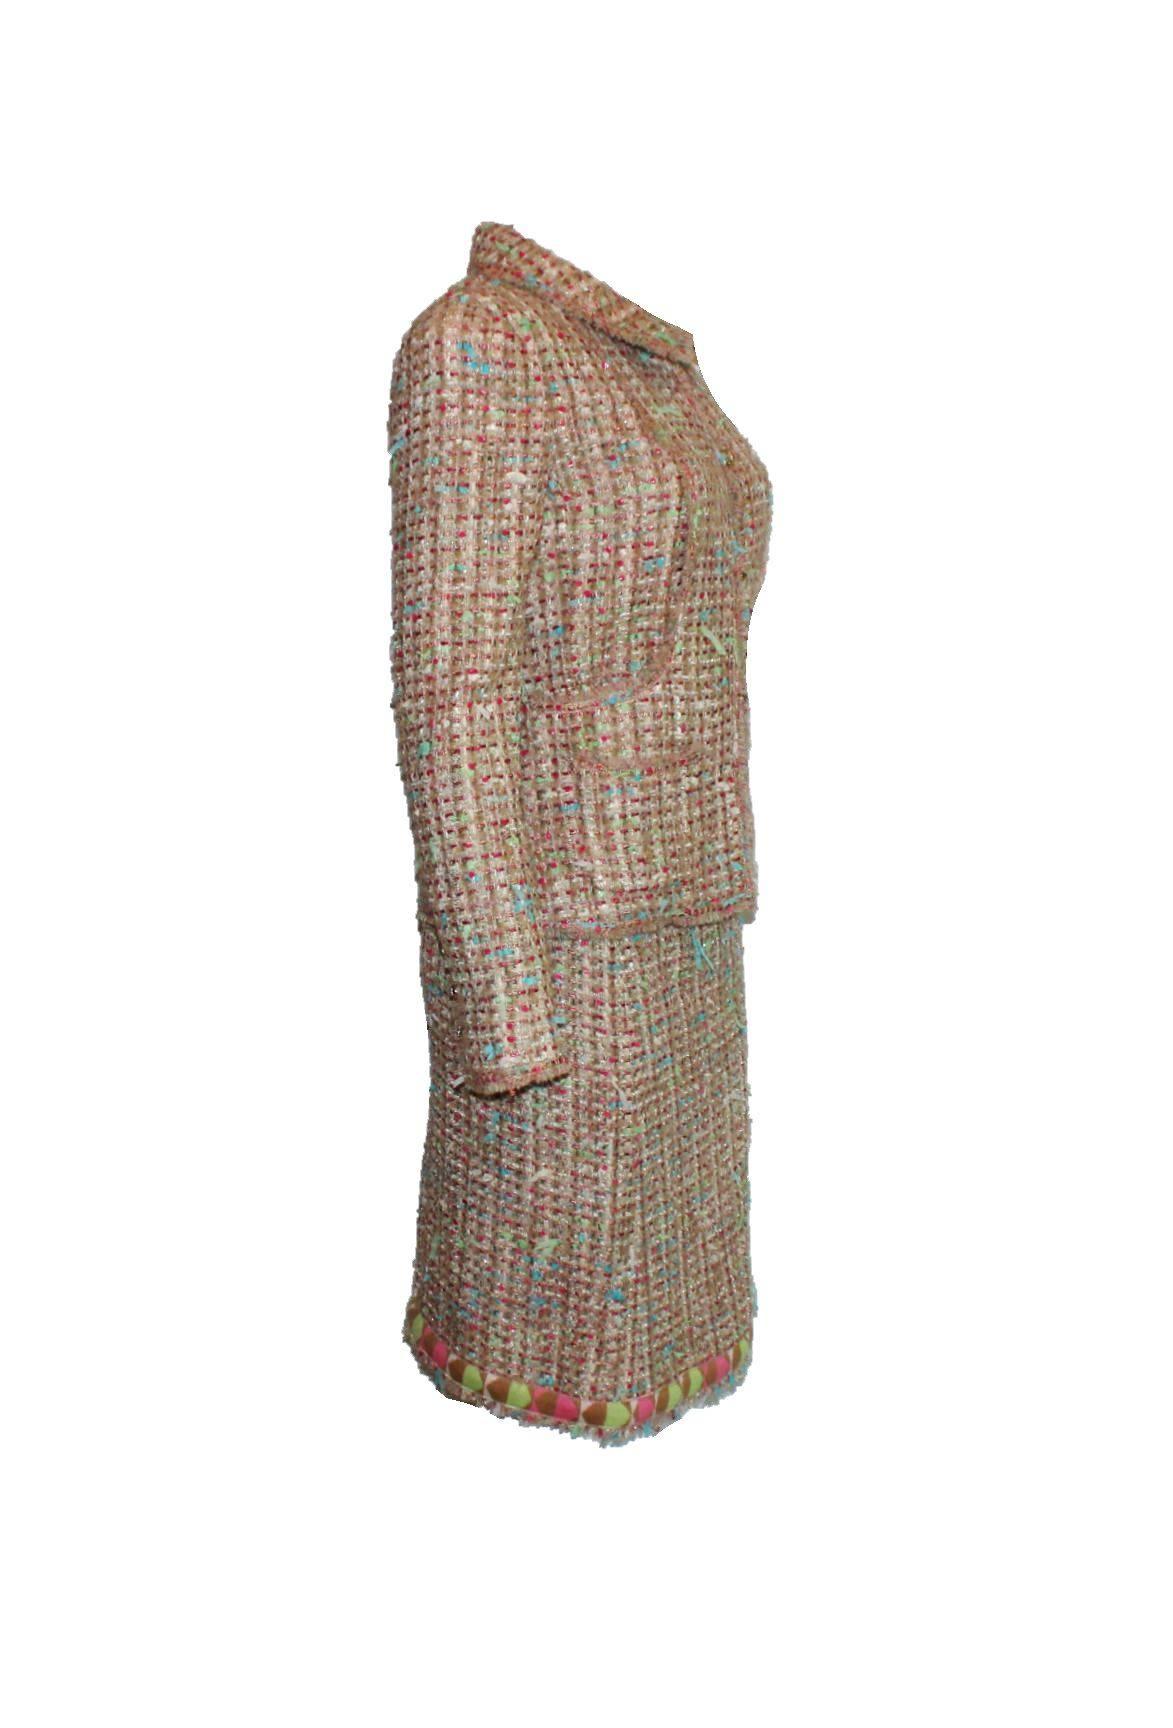 Beautiful CHANEL fantasy tweed jacket with matching skirt 
CHANEL at it's best - this suit is almost like Couture!
A CHANEL signature item that will last you for many years
Both pieces can be combined as suit or worn single - always